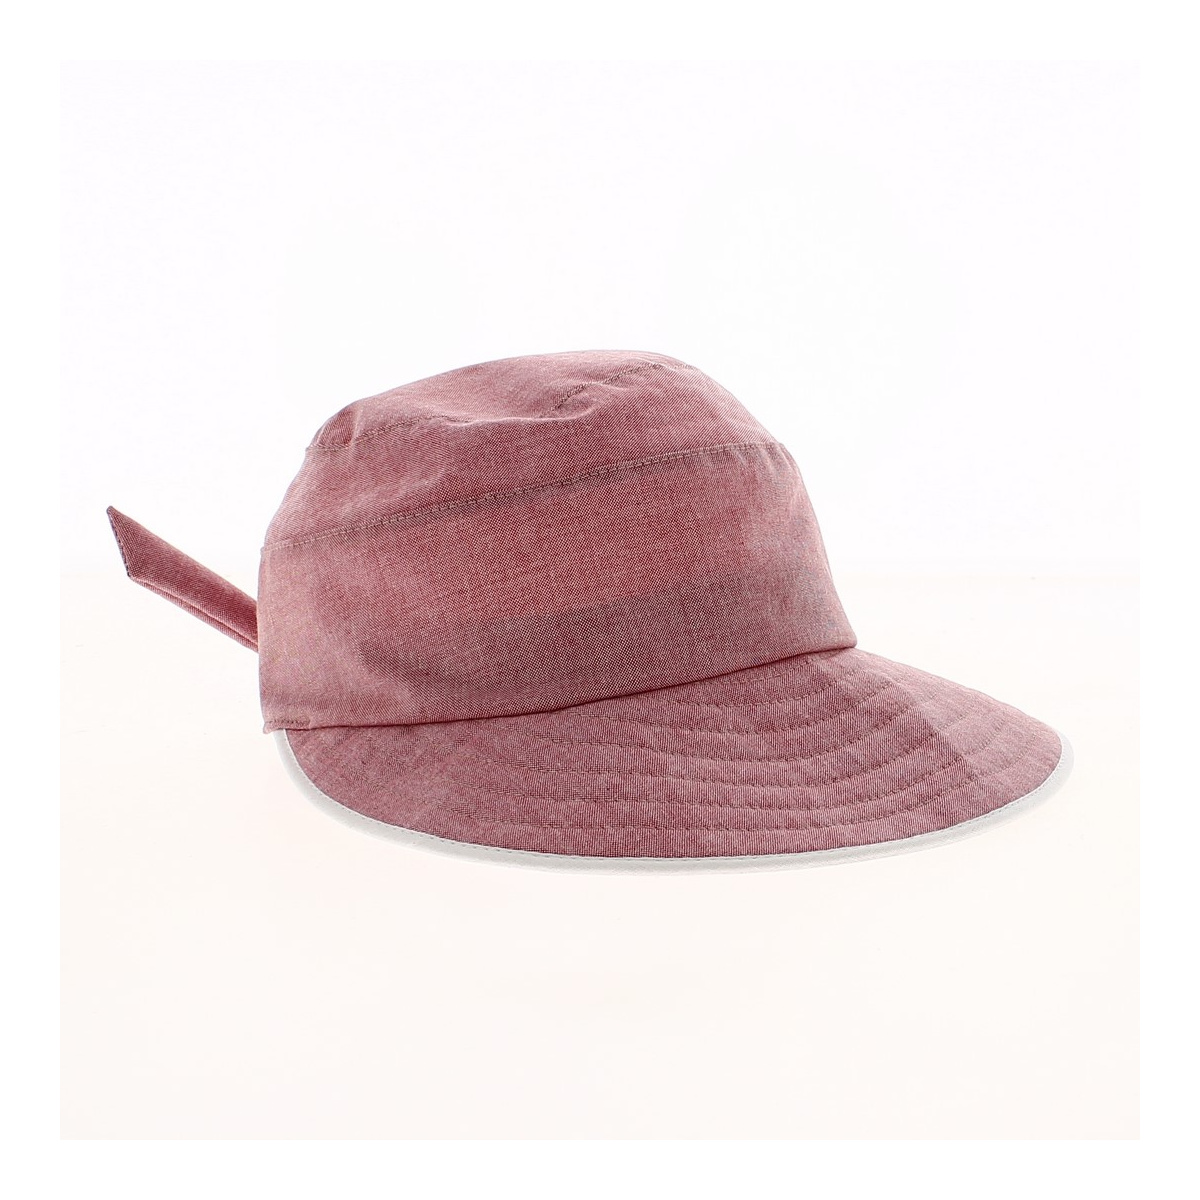 Casquette Grande Visière Olly Rose - Traclet